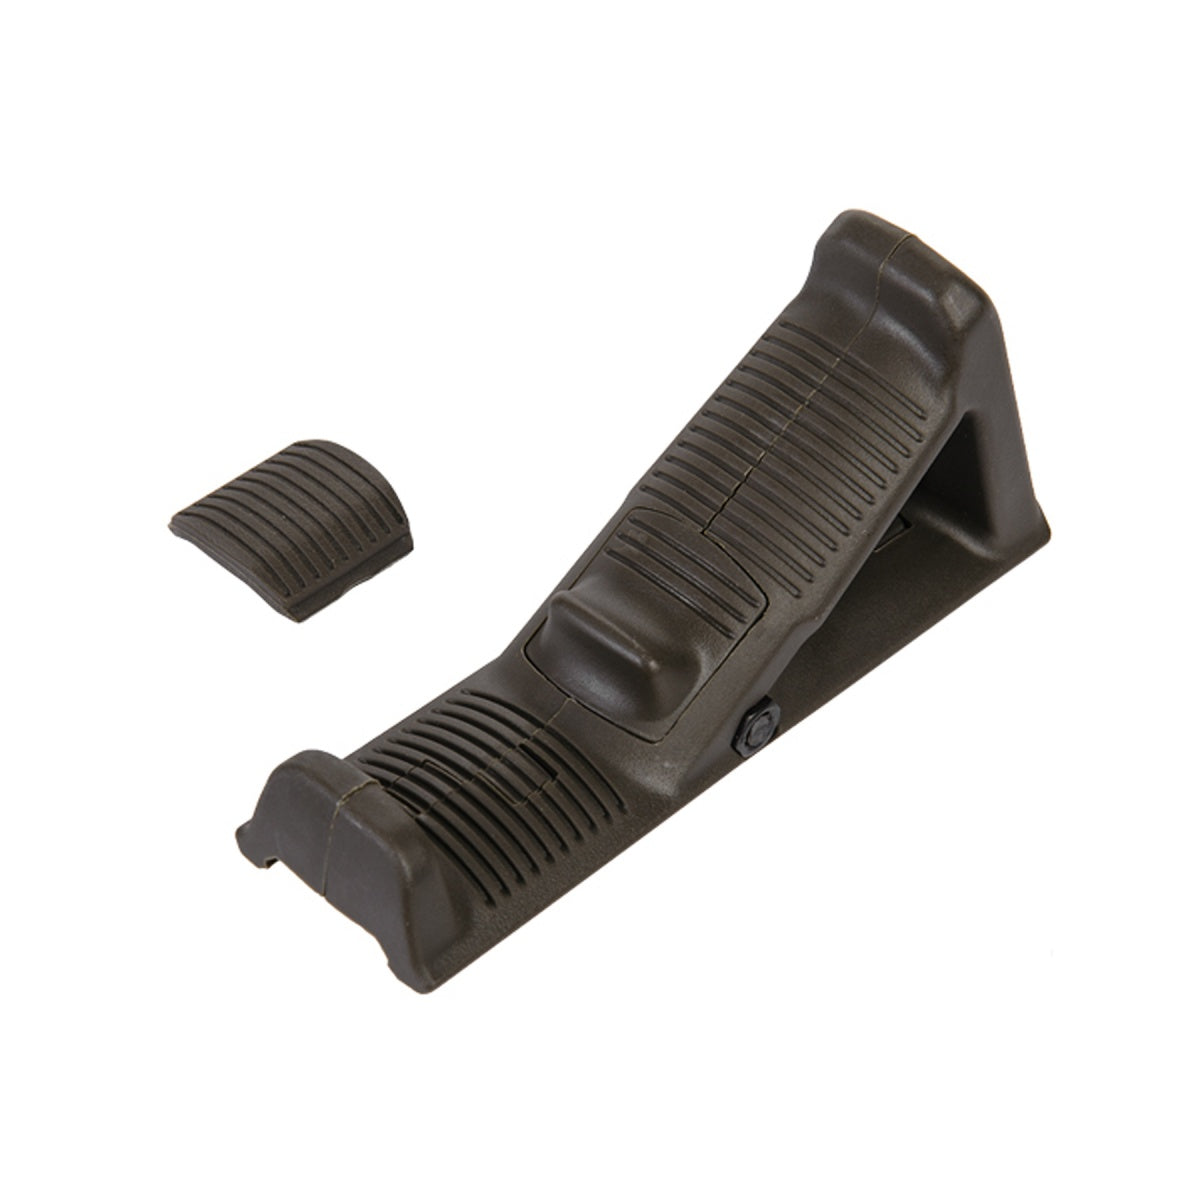 REINFORCED COMPACT POLYMER PICATINNY ANGLED FOREGRIP (OD Green) - ssairsoft